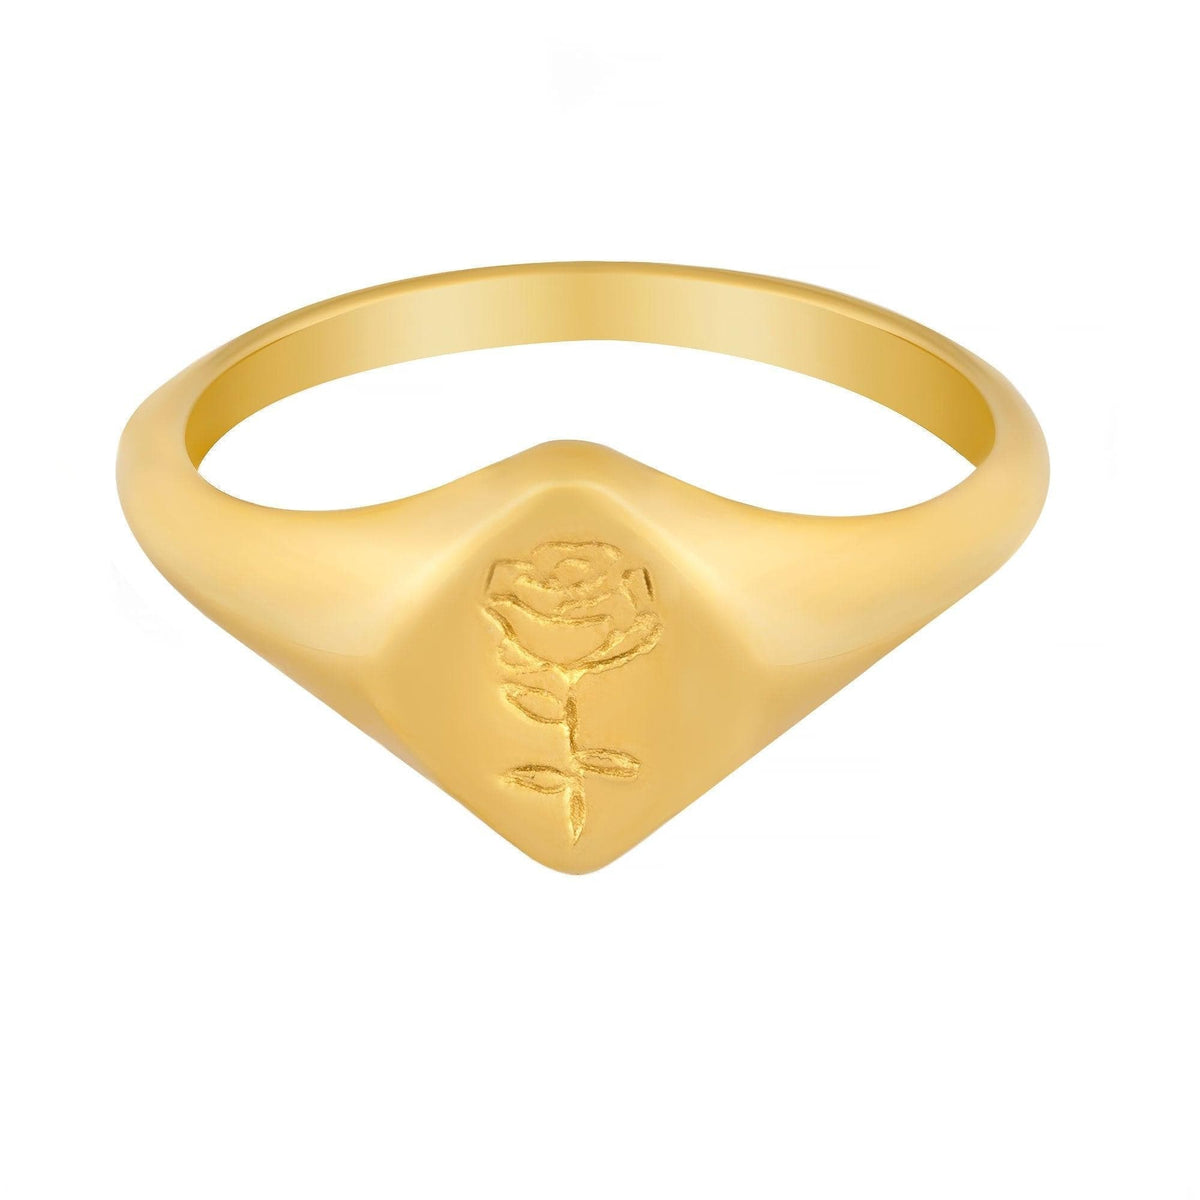 BohoMoon Stainless Steel Aurora Ring Gold / US 6 / UK L / EUR 51 (small)